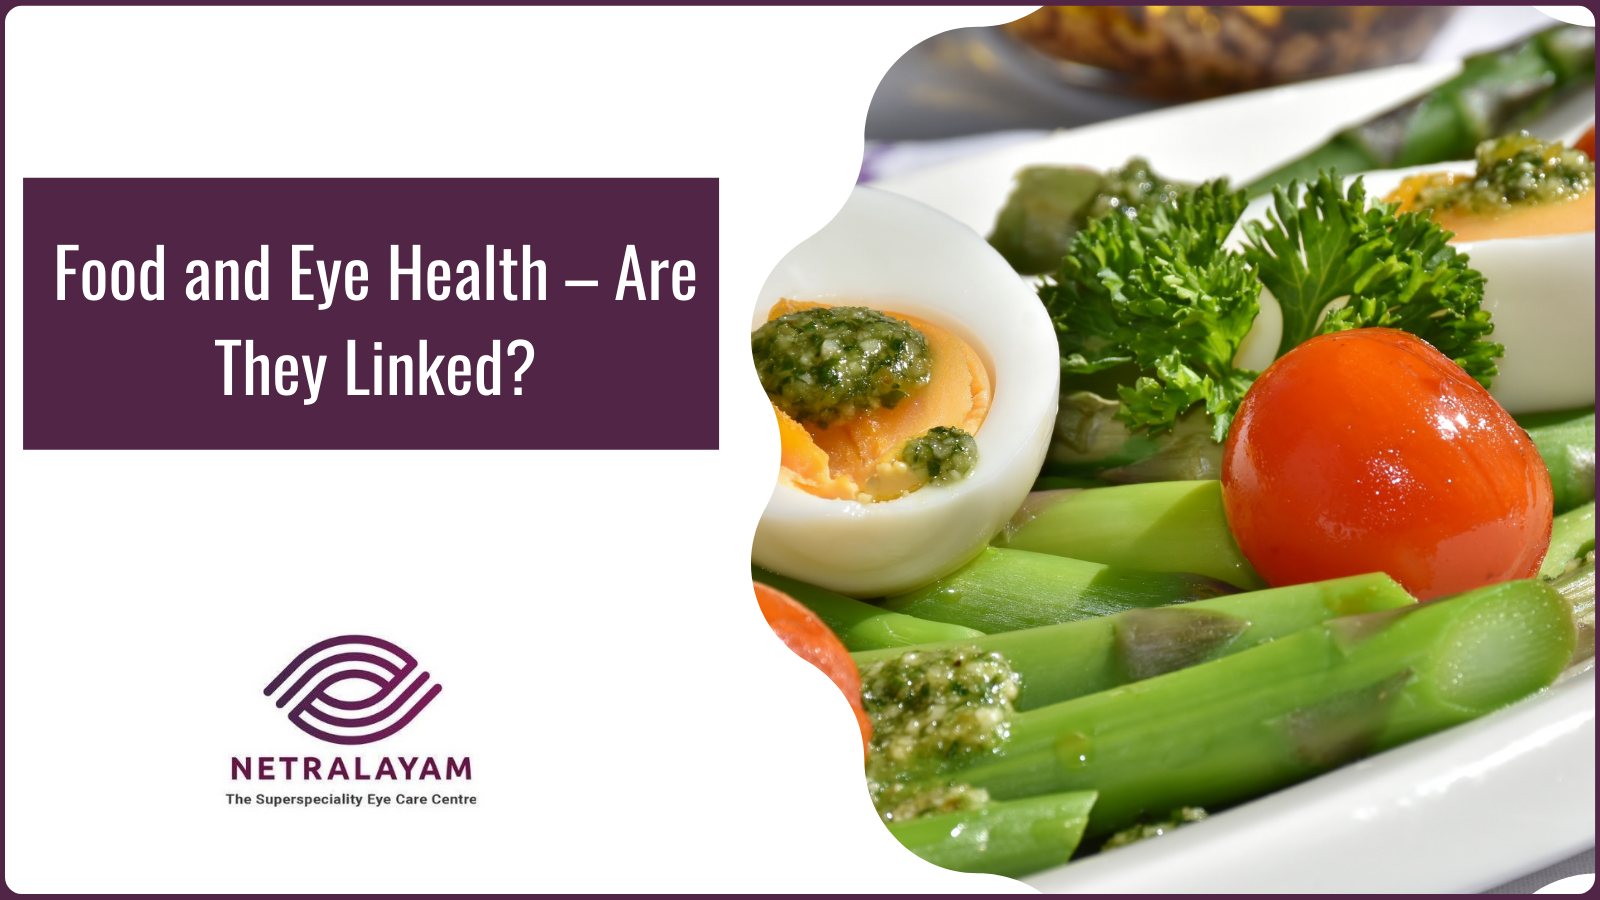 Food and Eye Health – Are They Linked?